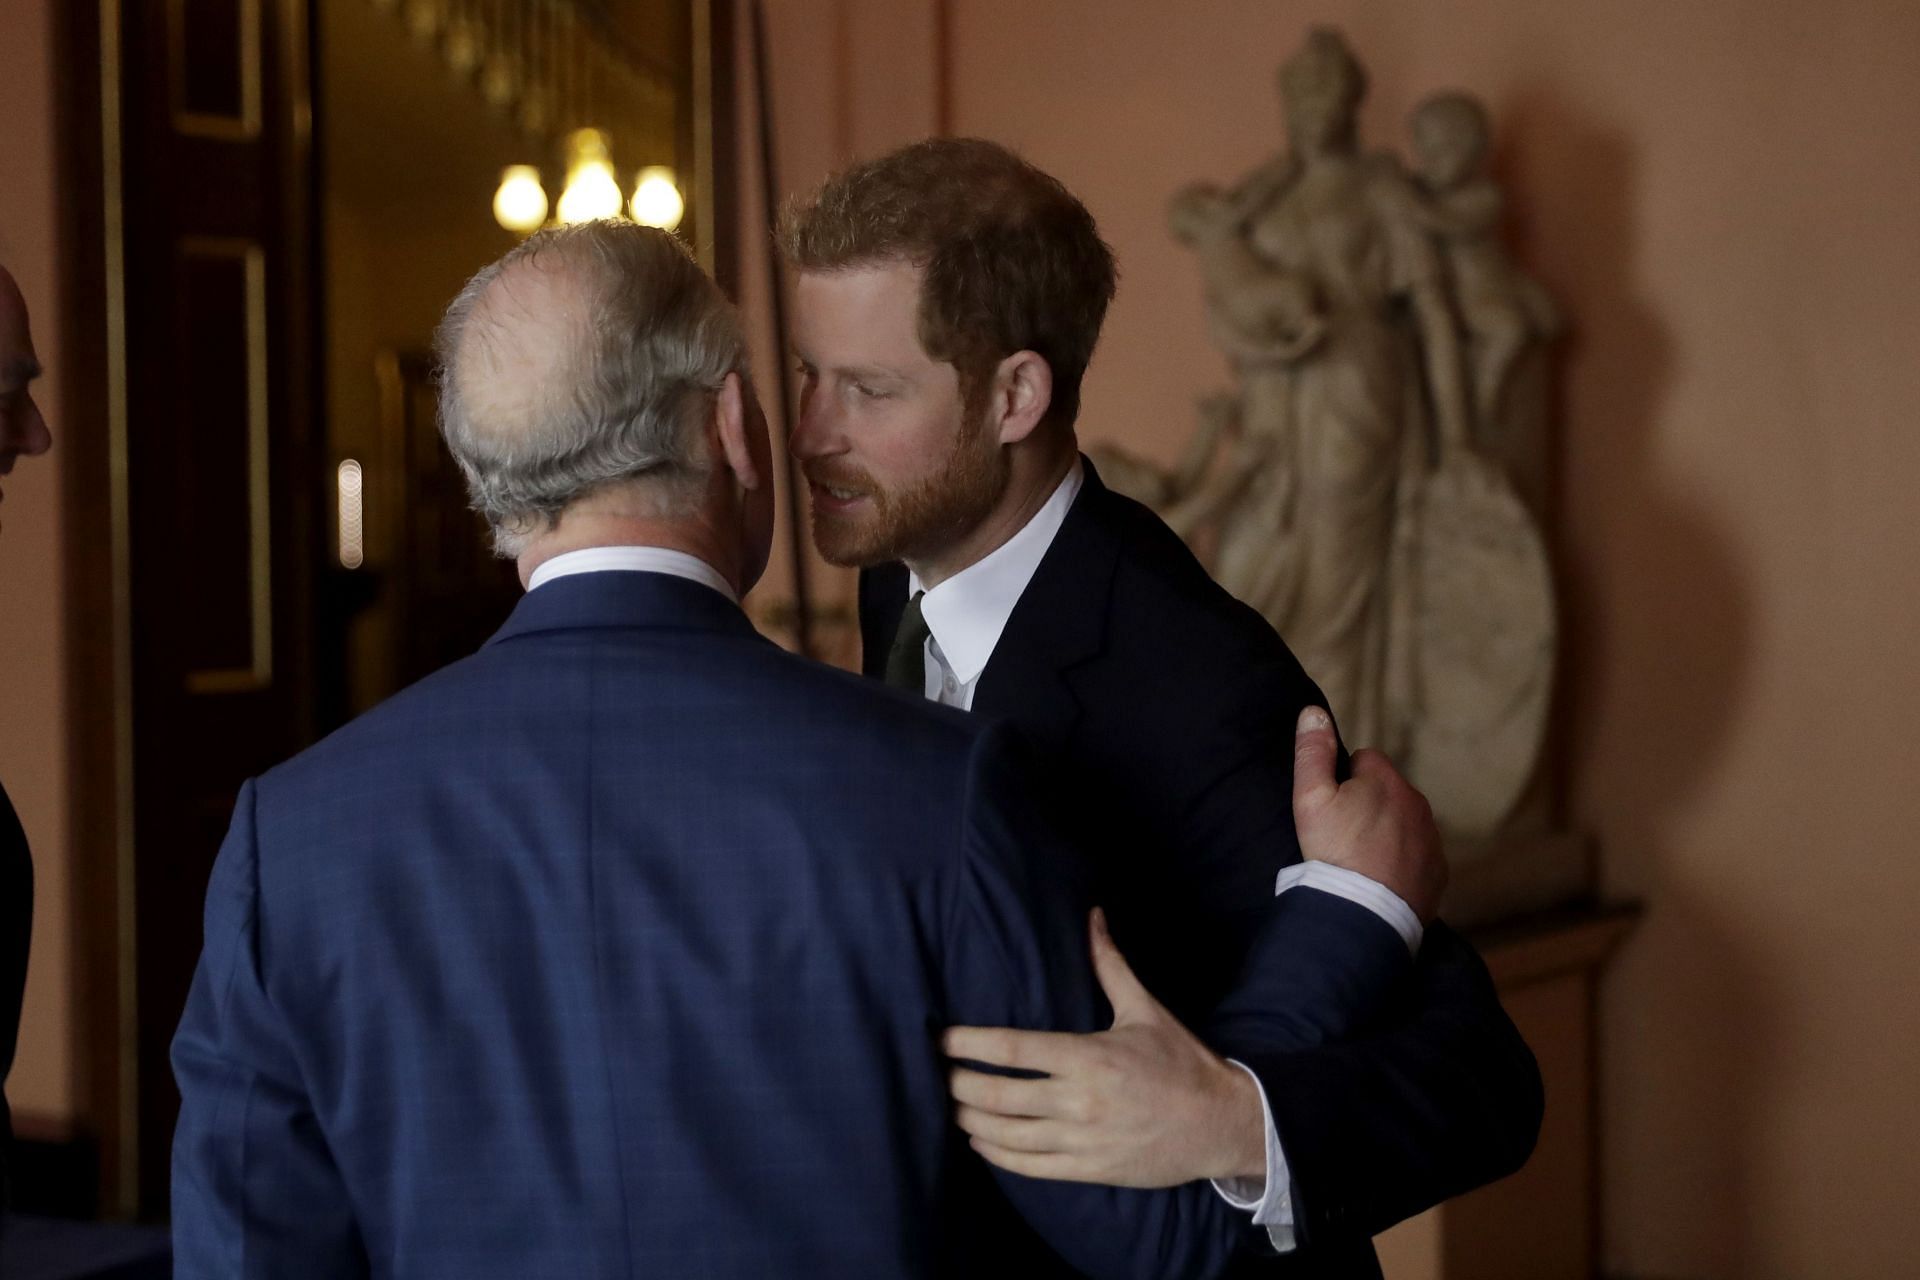 Prince Harry with King Charles in 2018 (Image via Getty/Matt Dunham)